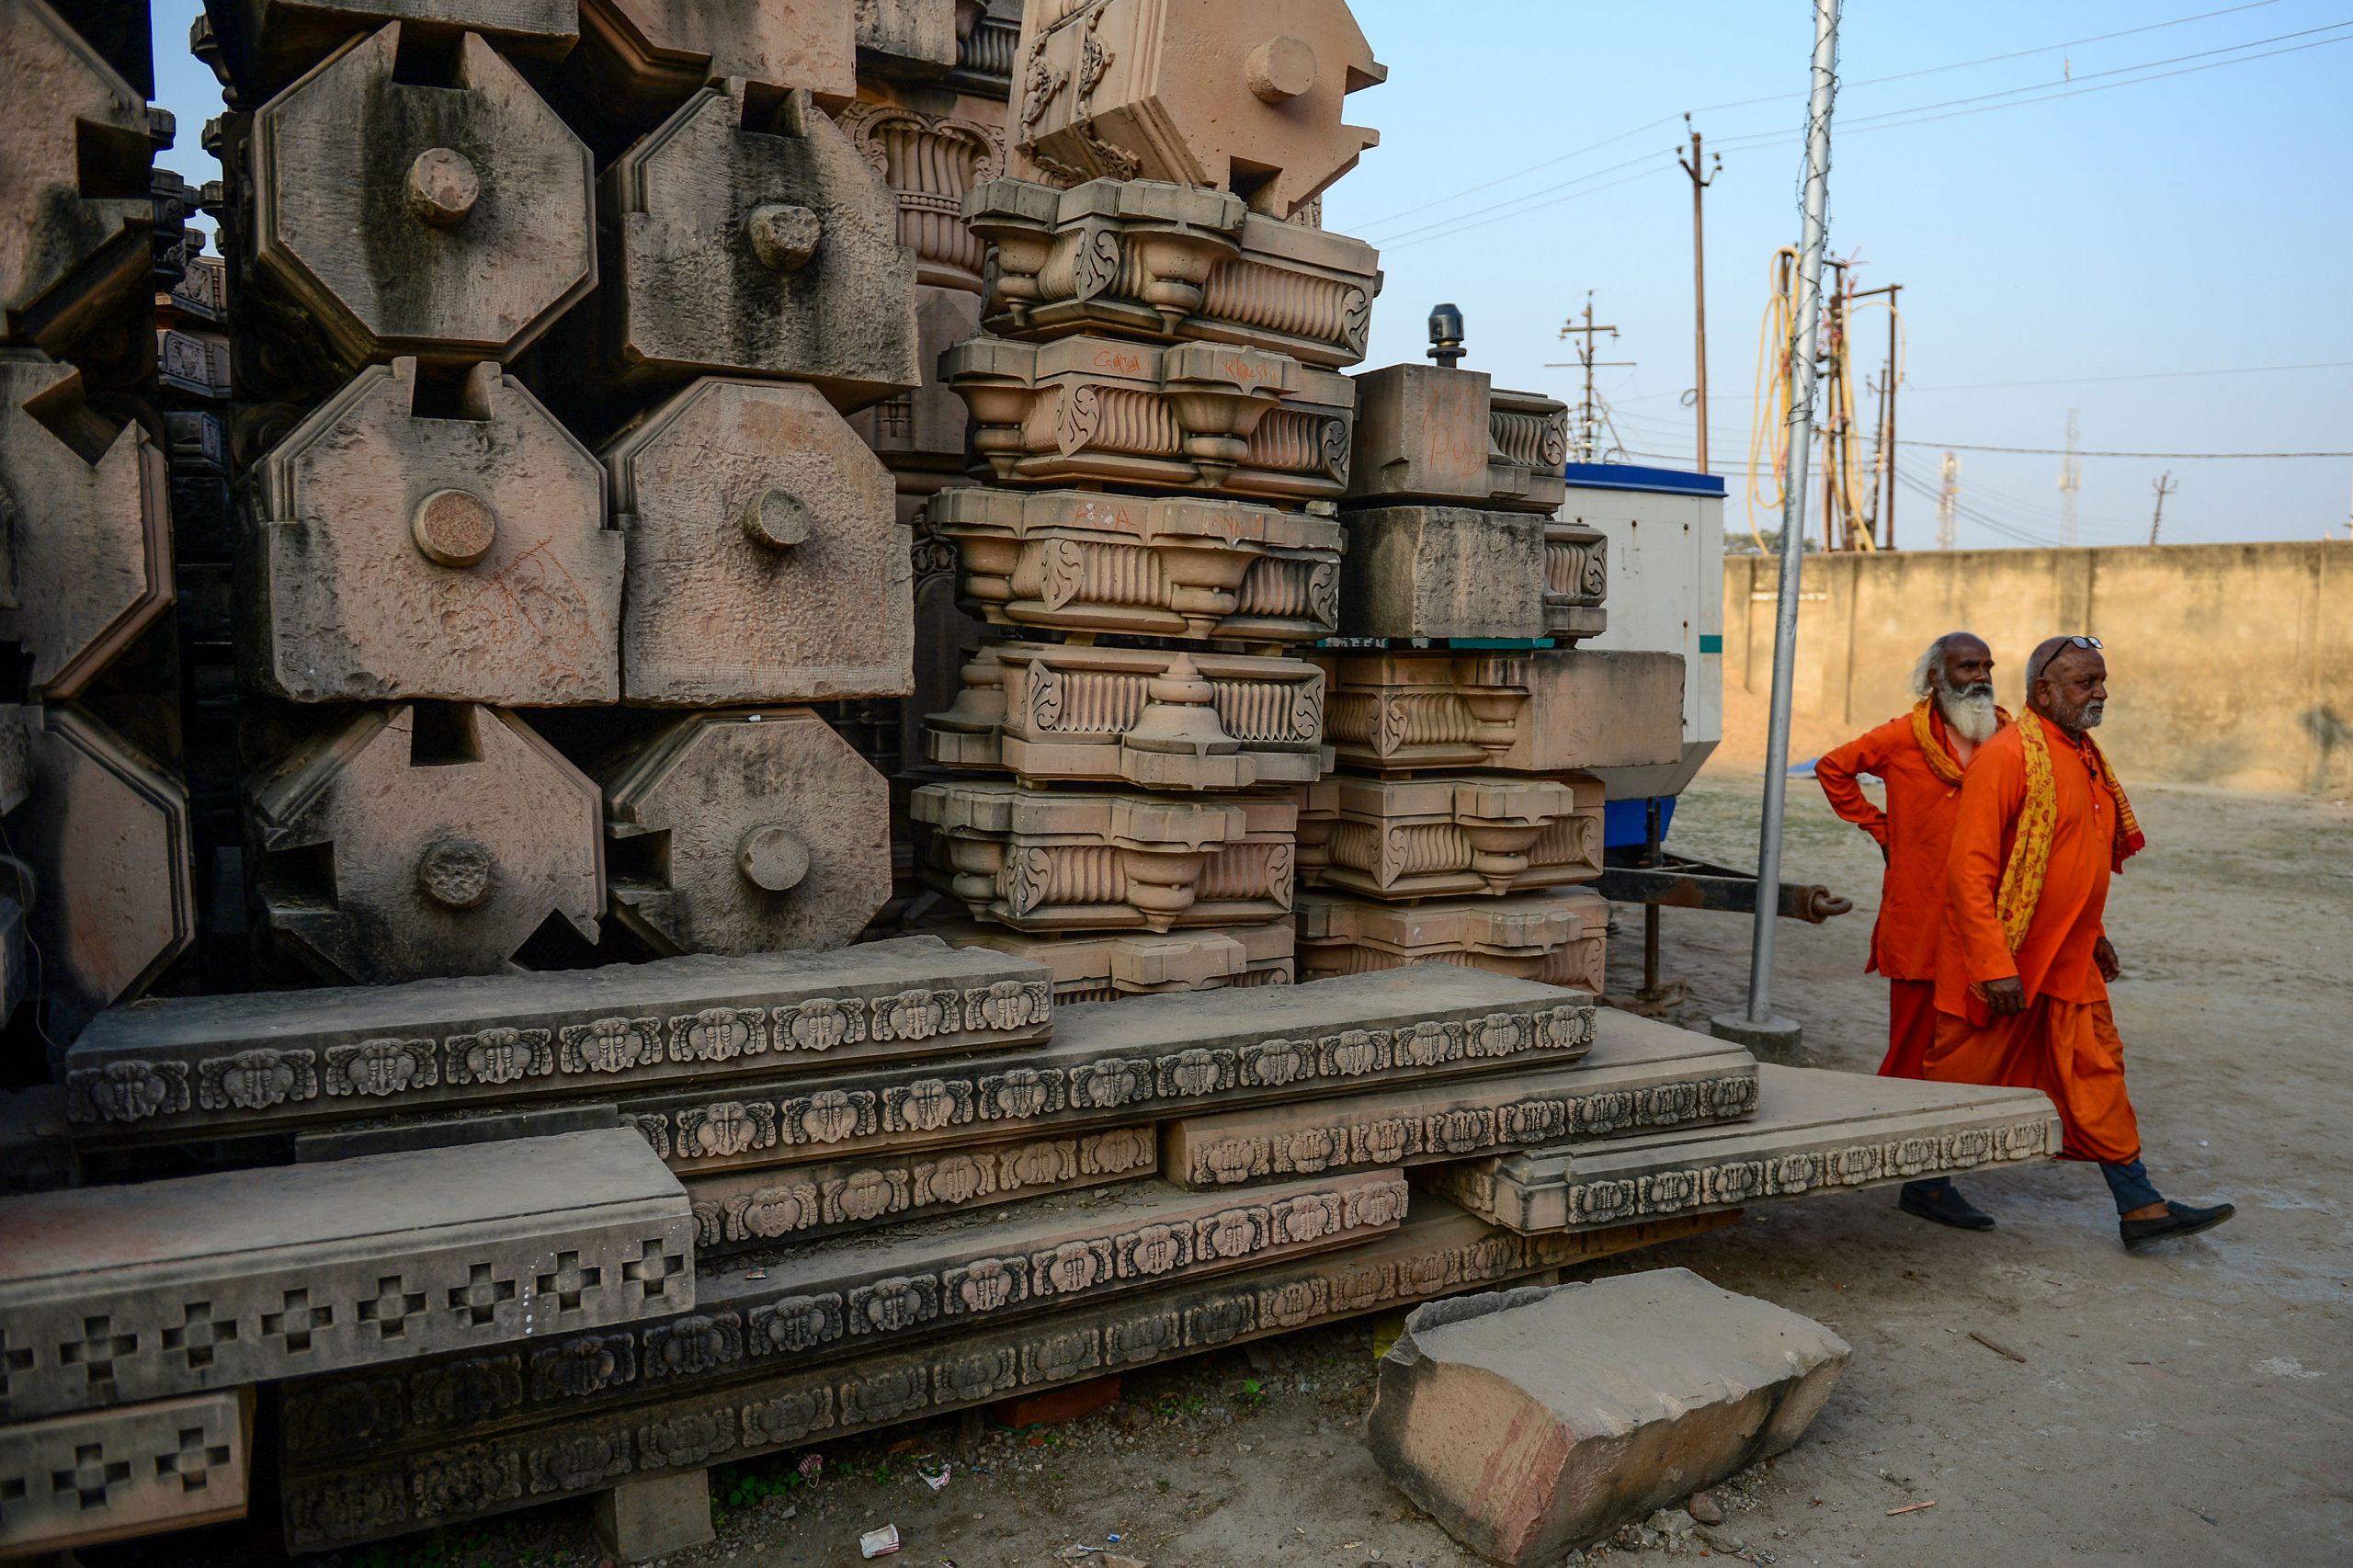 Copper plates to fuse stone blocks: Here’s how Ayodhya Ram temple will be unique in construction